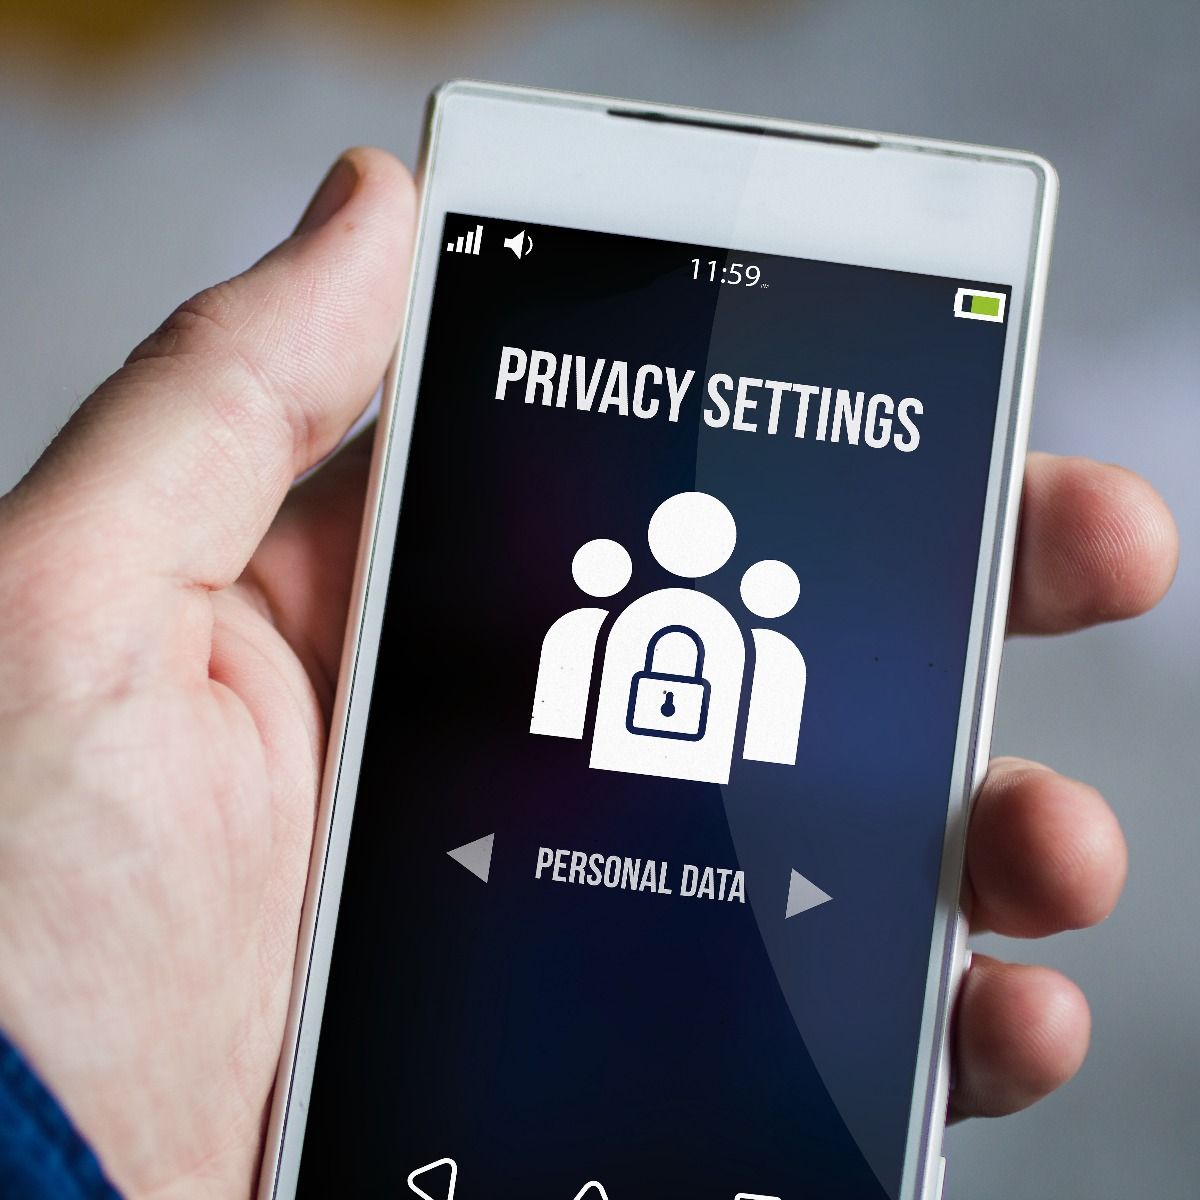 privacy settings screen on phone